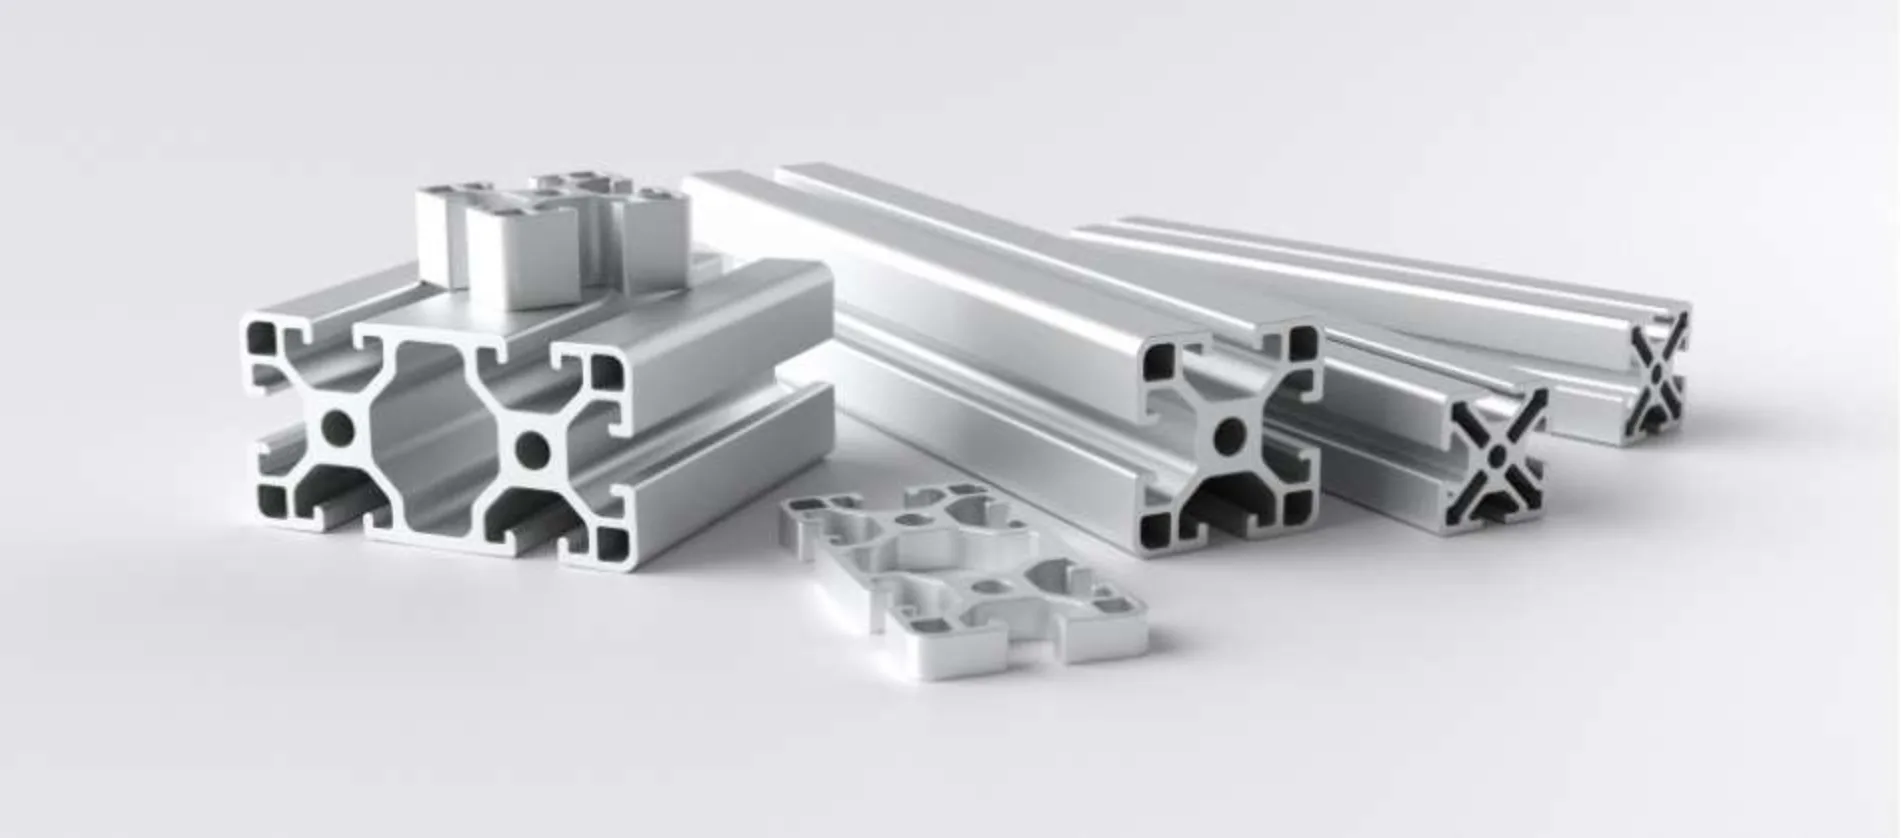 Aluminum T-Slot Framing Profiles 40mm - with an 8mm T-Slot